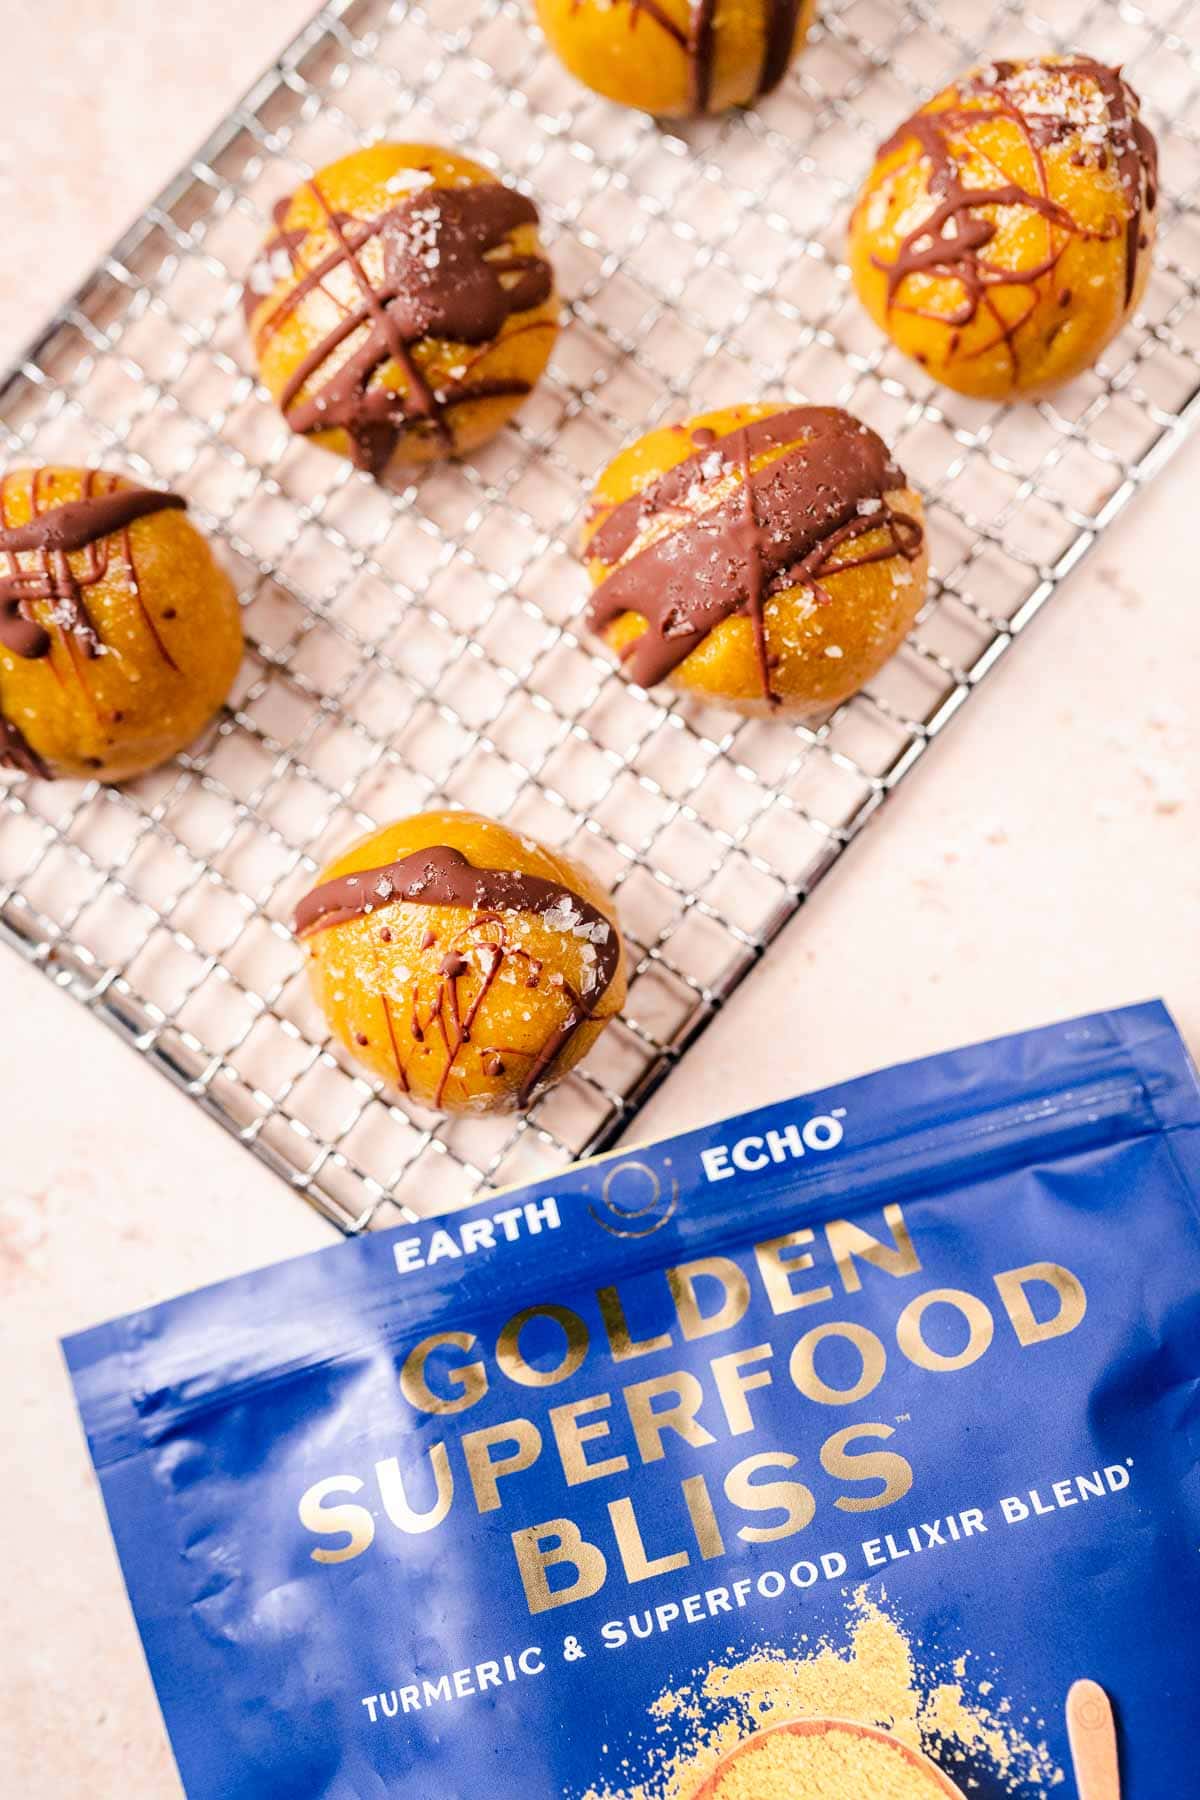 Top view of golden milk bites and a blue Earth Echo Golden Superfood Bliss bag.